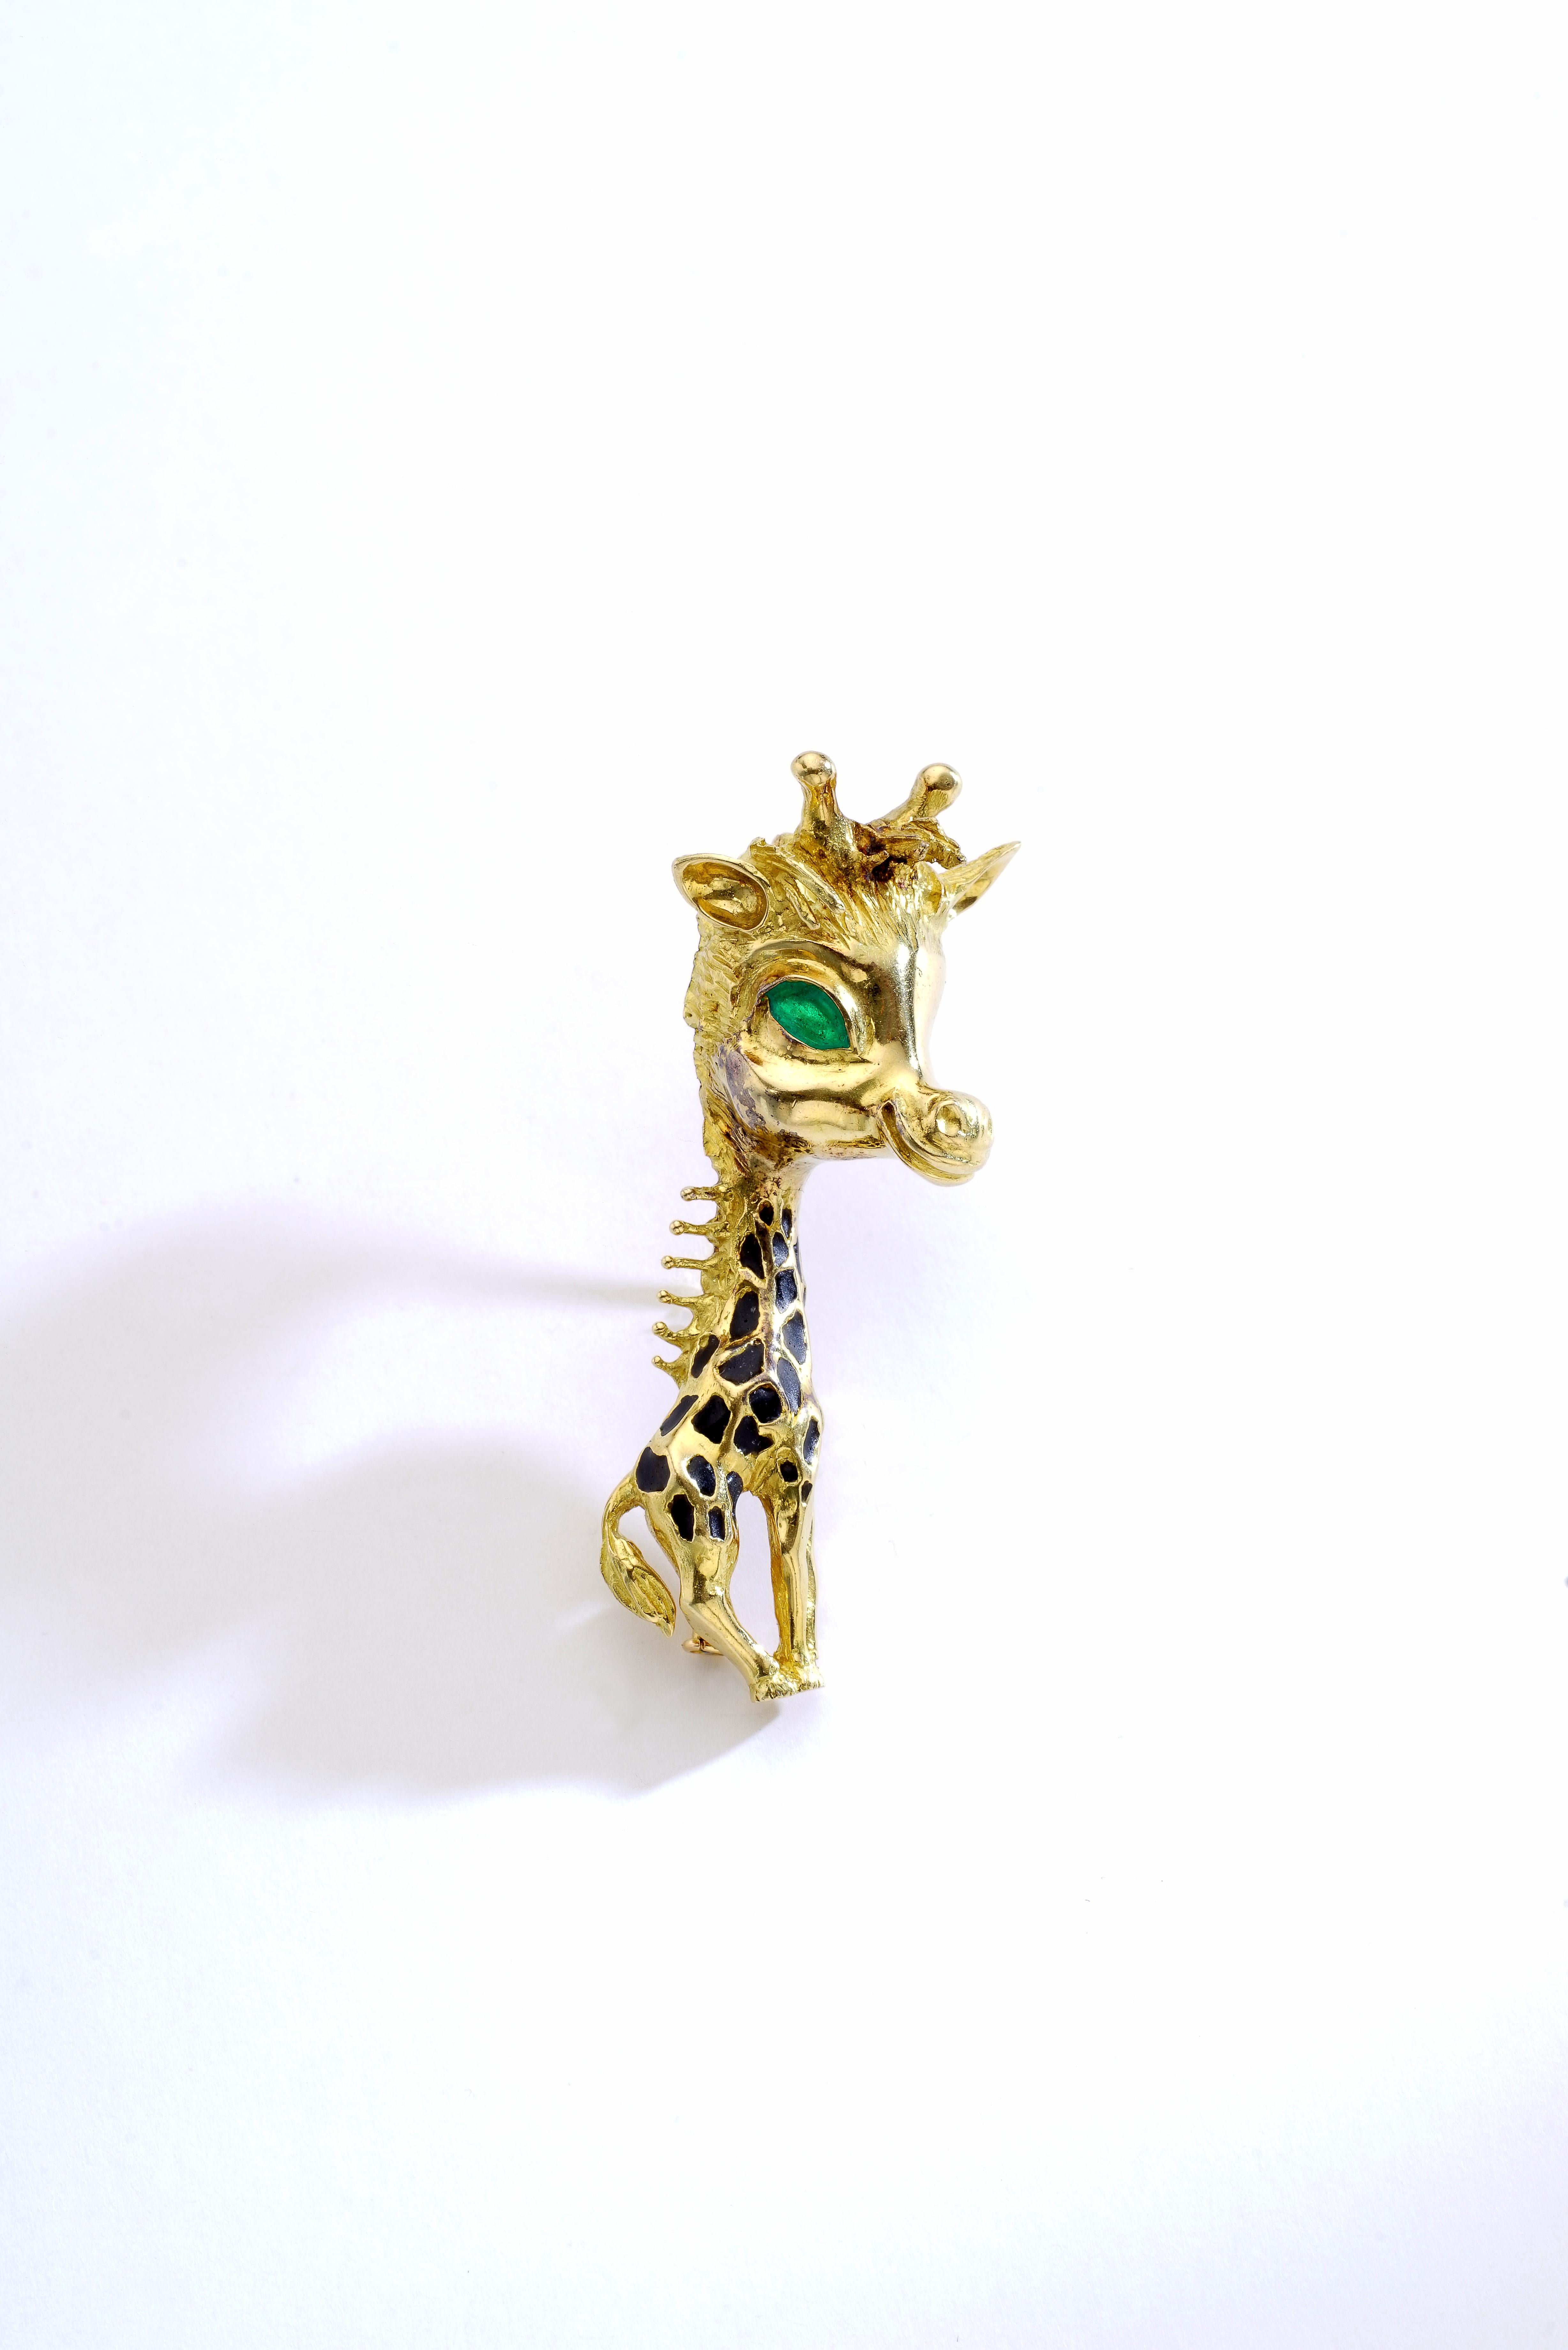 Absolutely! The French Gold Giraffe Brooch is a true gem from the 1970s. This delightful brooch clip is not only a stunning accessory but also carries a meaningful message of “Save the Planet.”

Crafted in France, this brooch is a perfect blend of